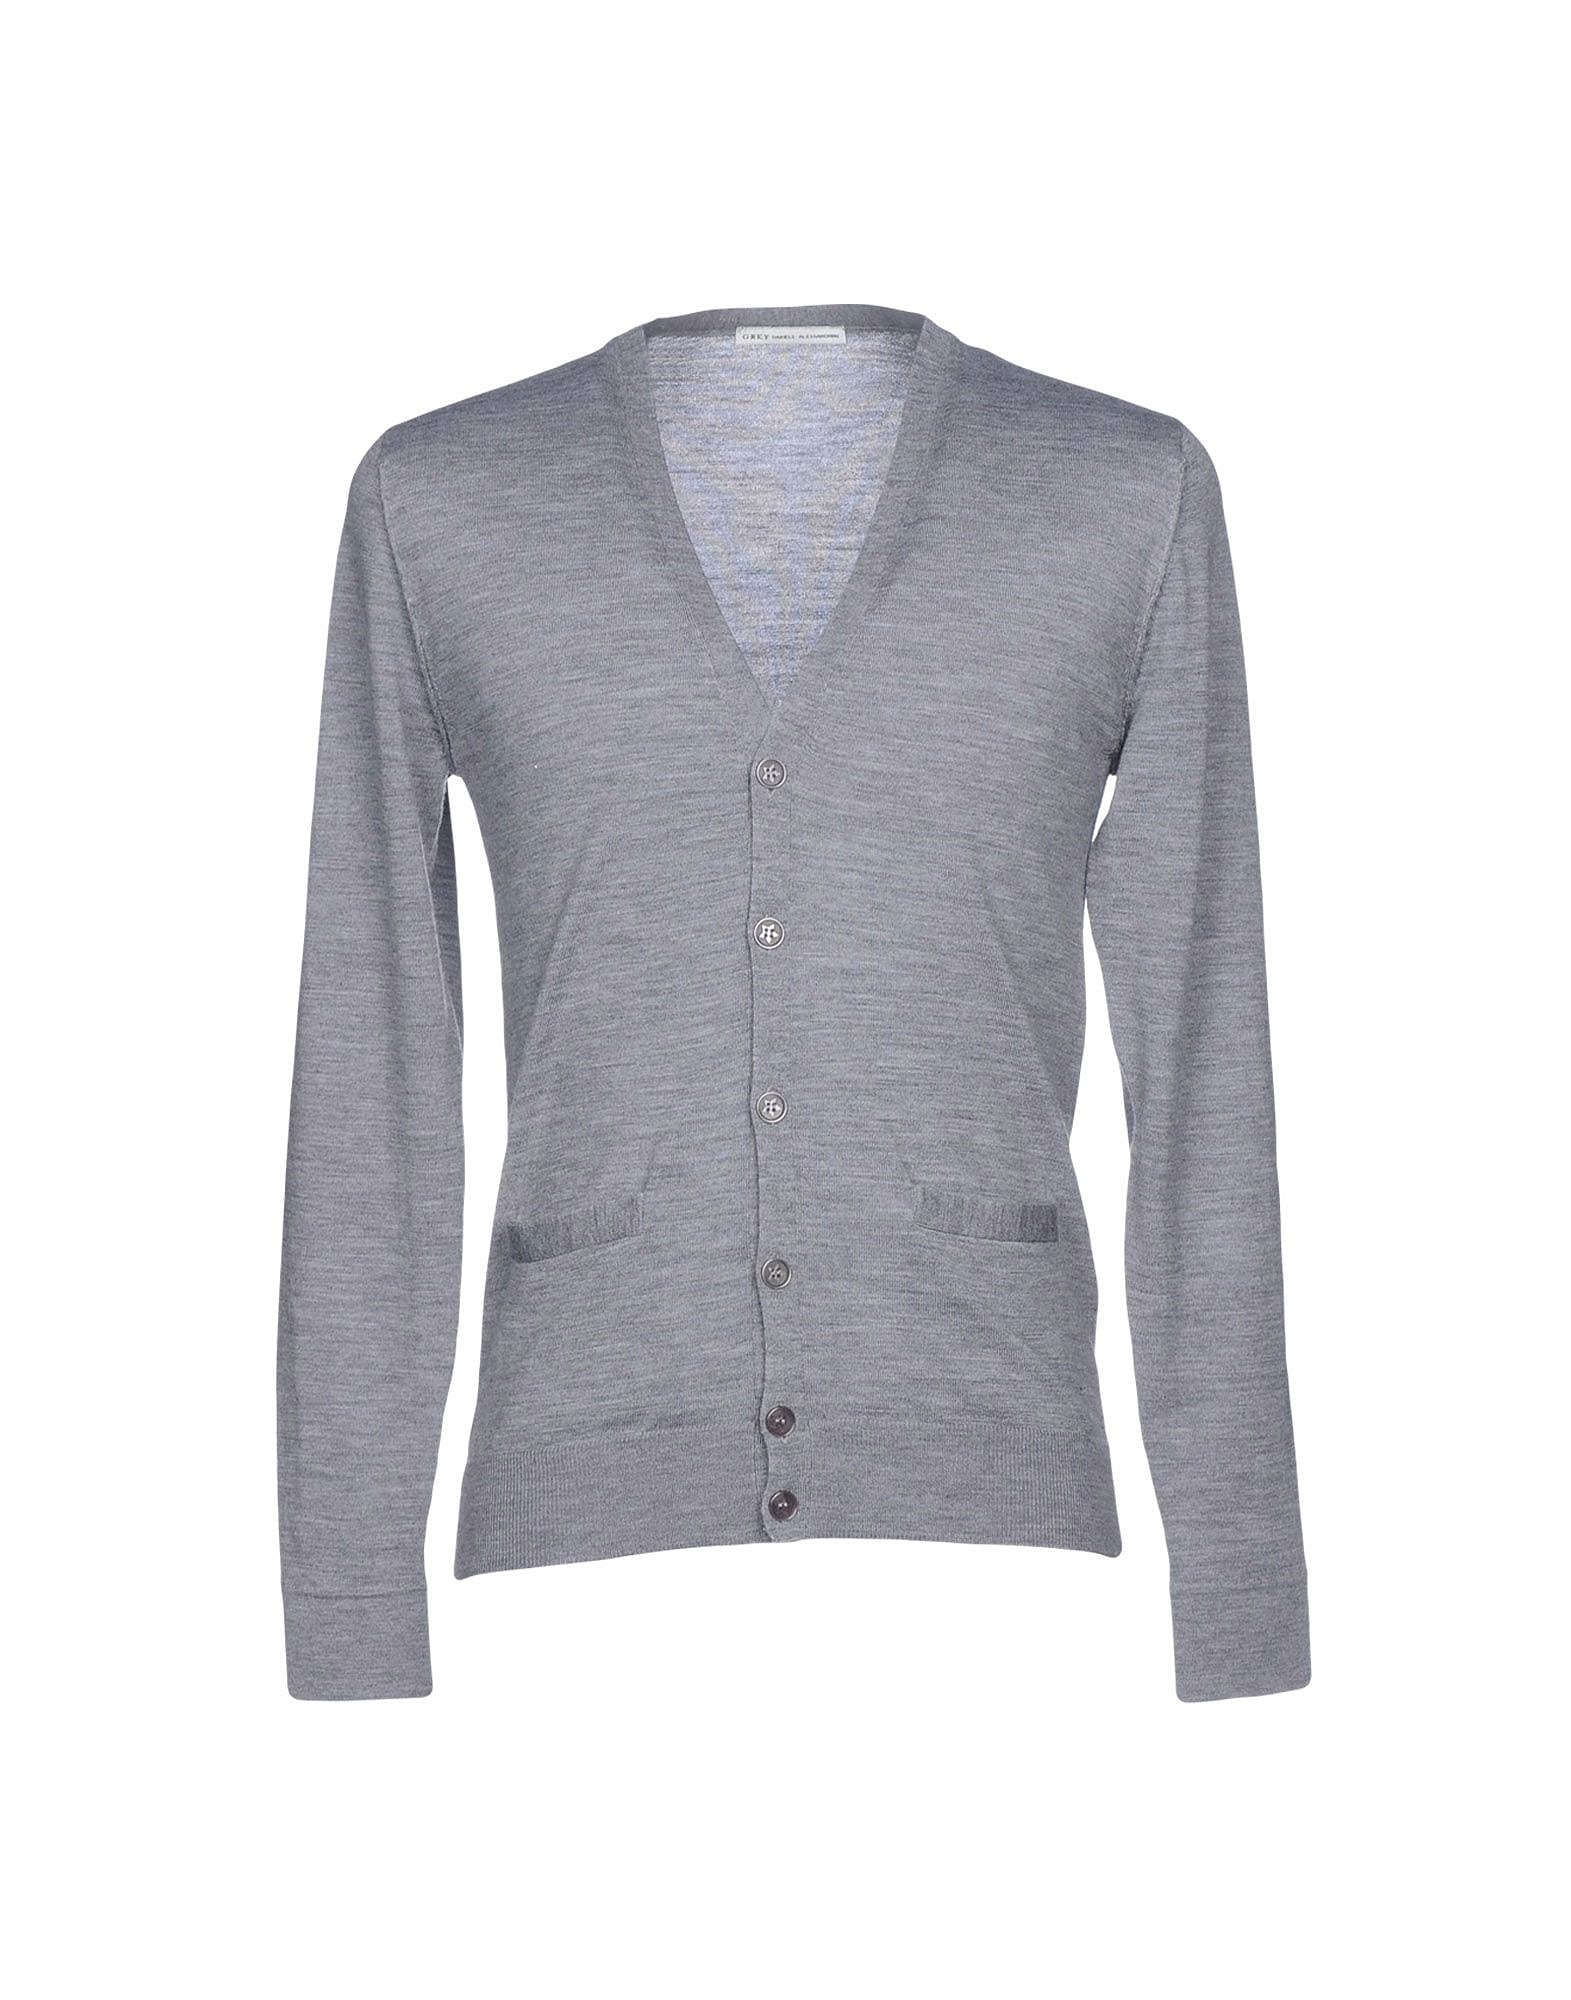 Gray Cardigan Cordage Men's Special! Introducing stylish outfits with ...